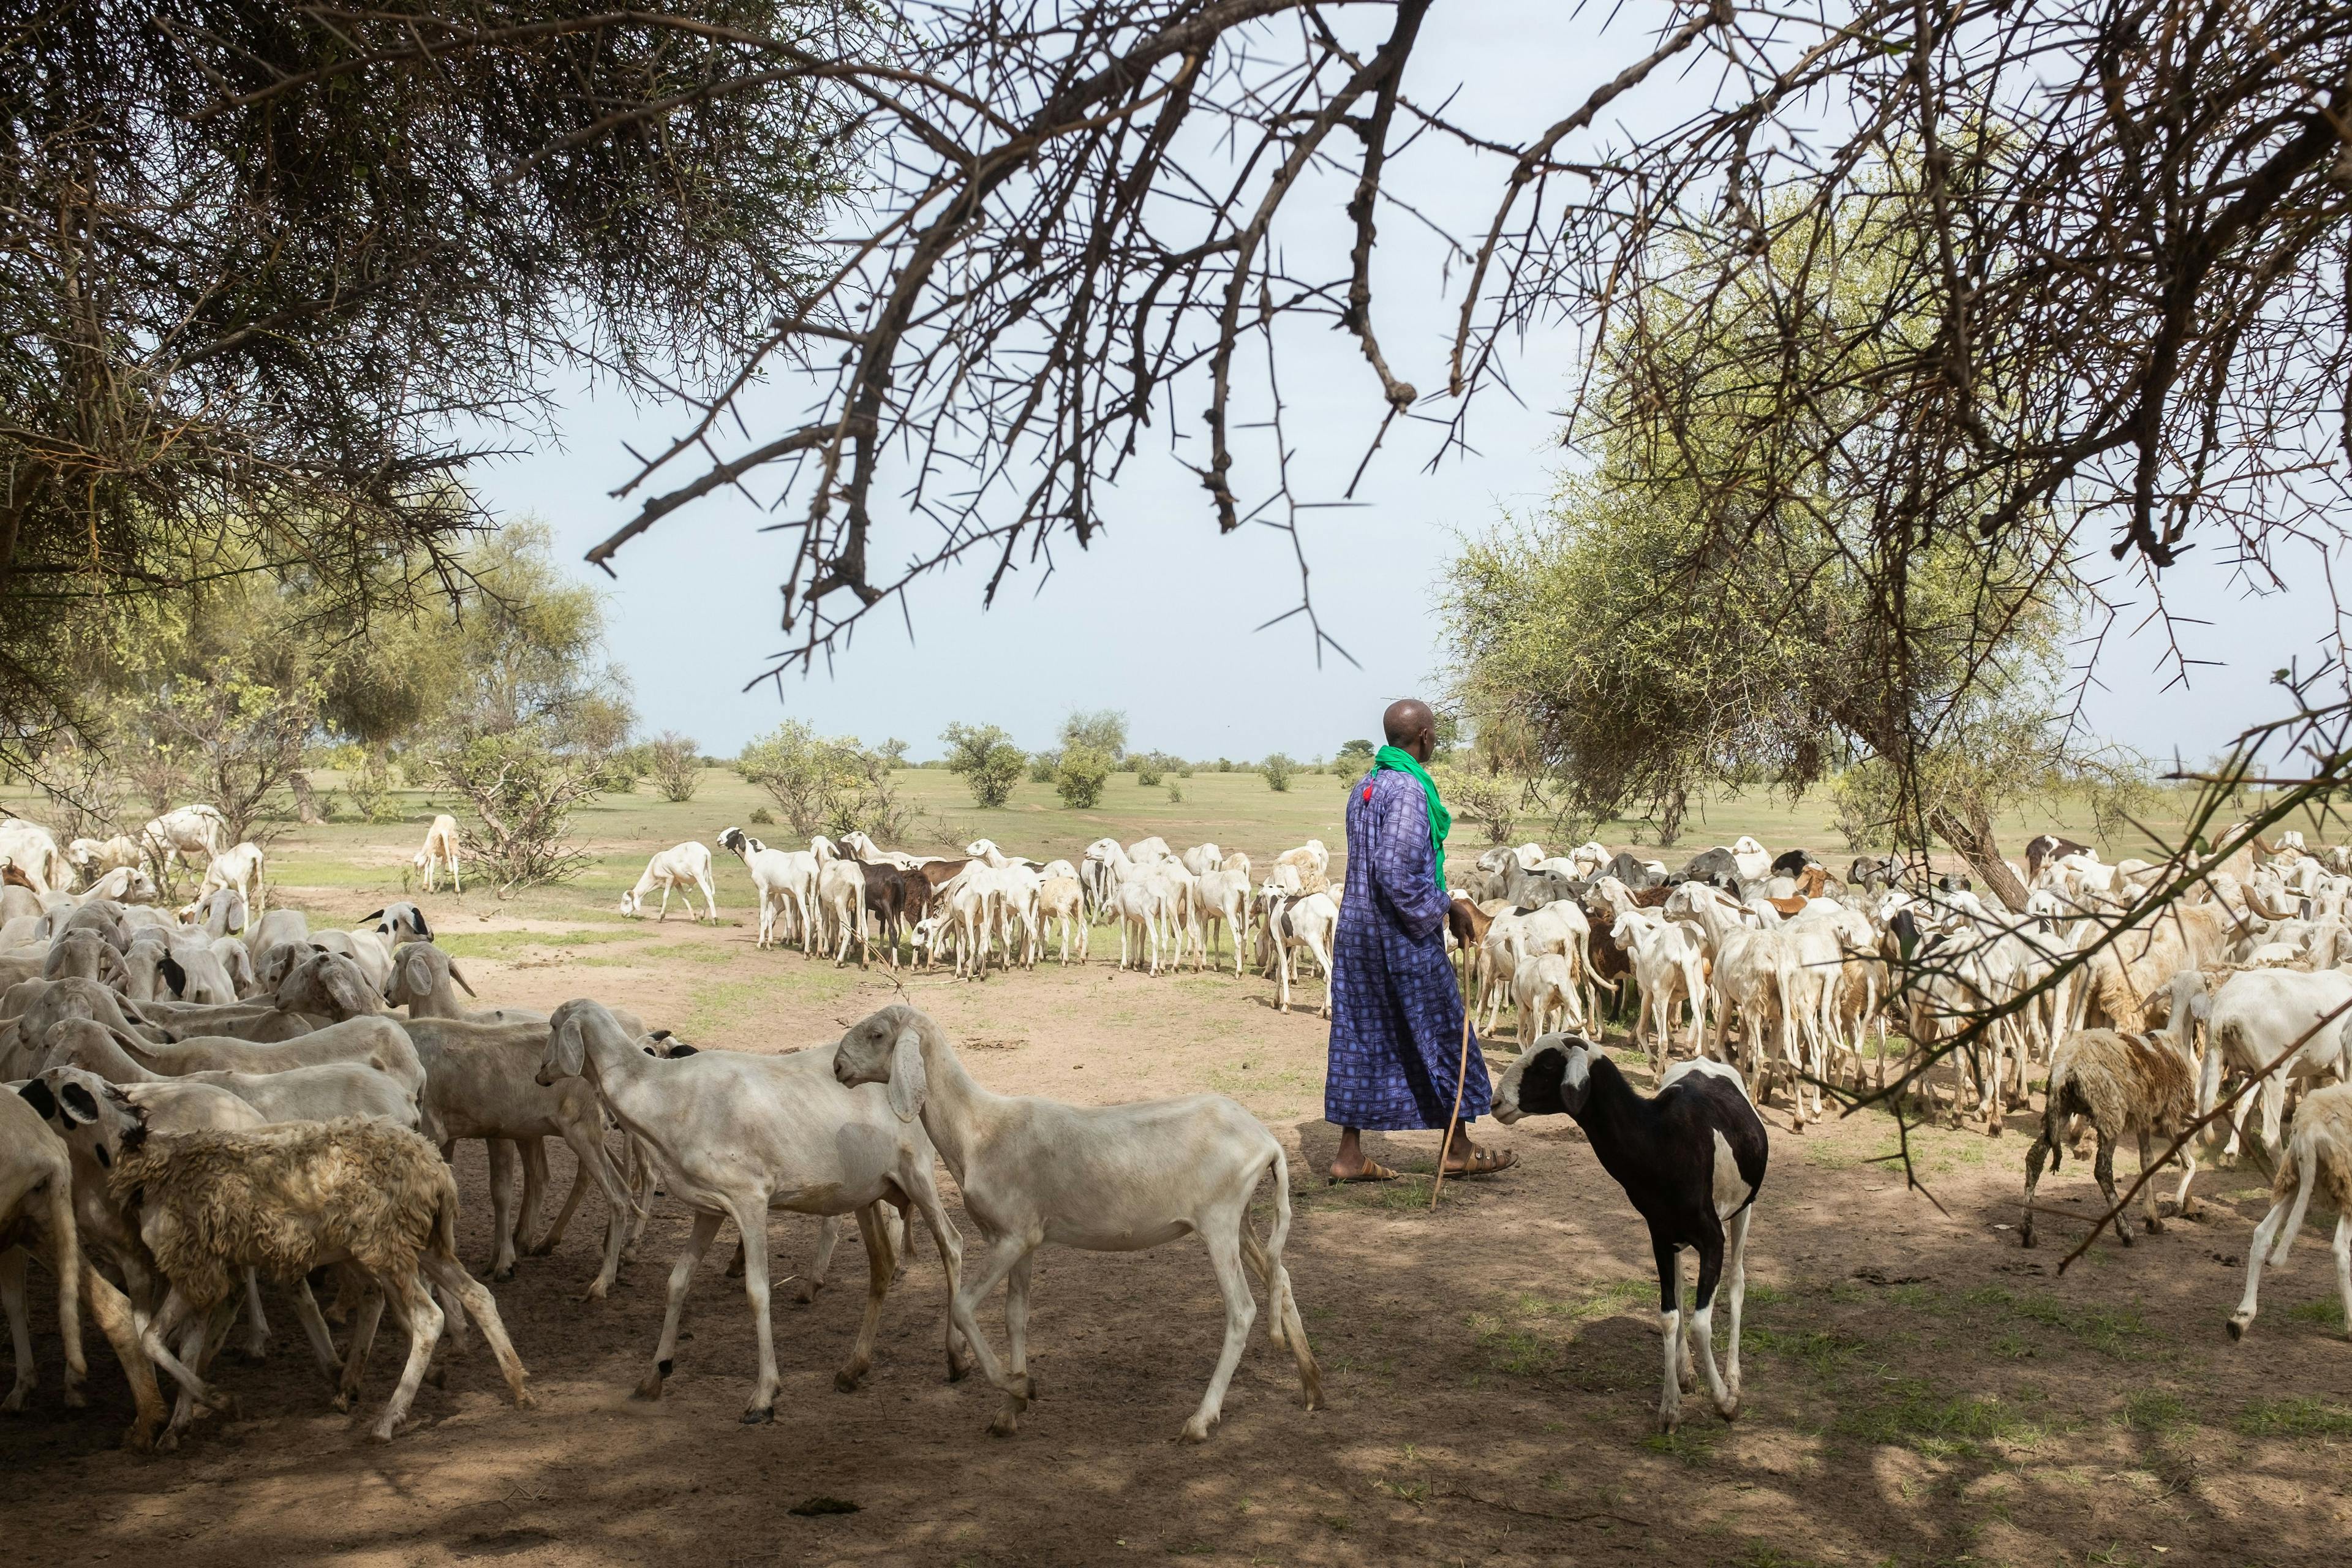 Different farmers’ flocks mix at a watering hole as the animals jostle to drink. Shepherd Samba Ly (62) checks that all his animals are accounted for. As more pastoralists settle down to farm, tensions with those who remain herders may arise.